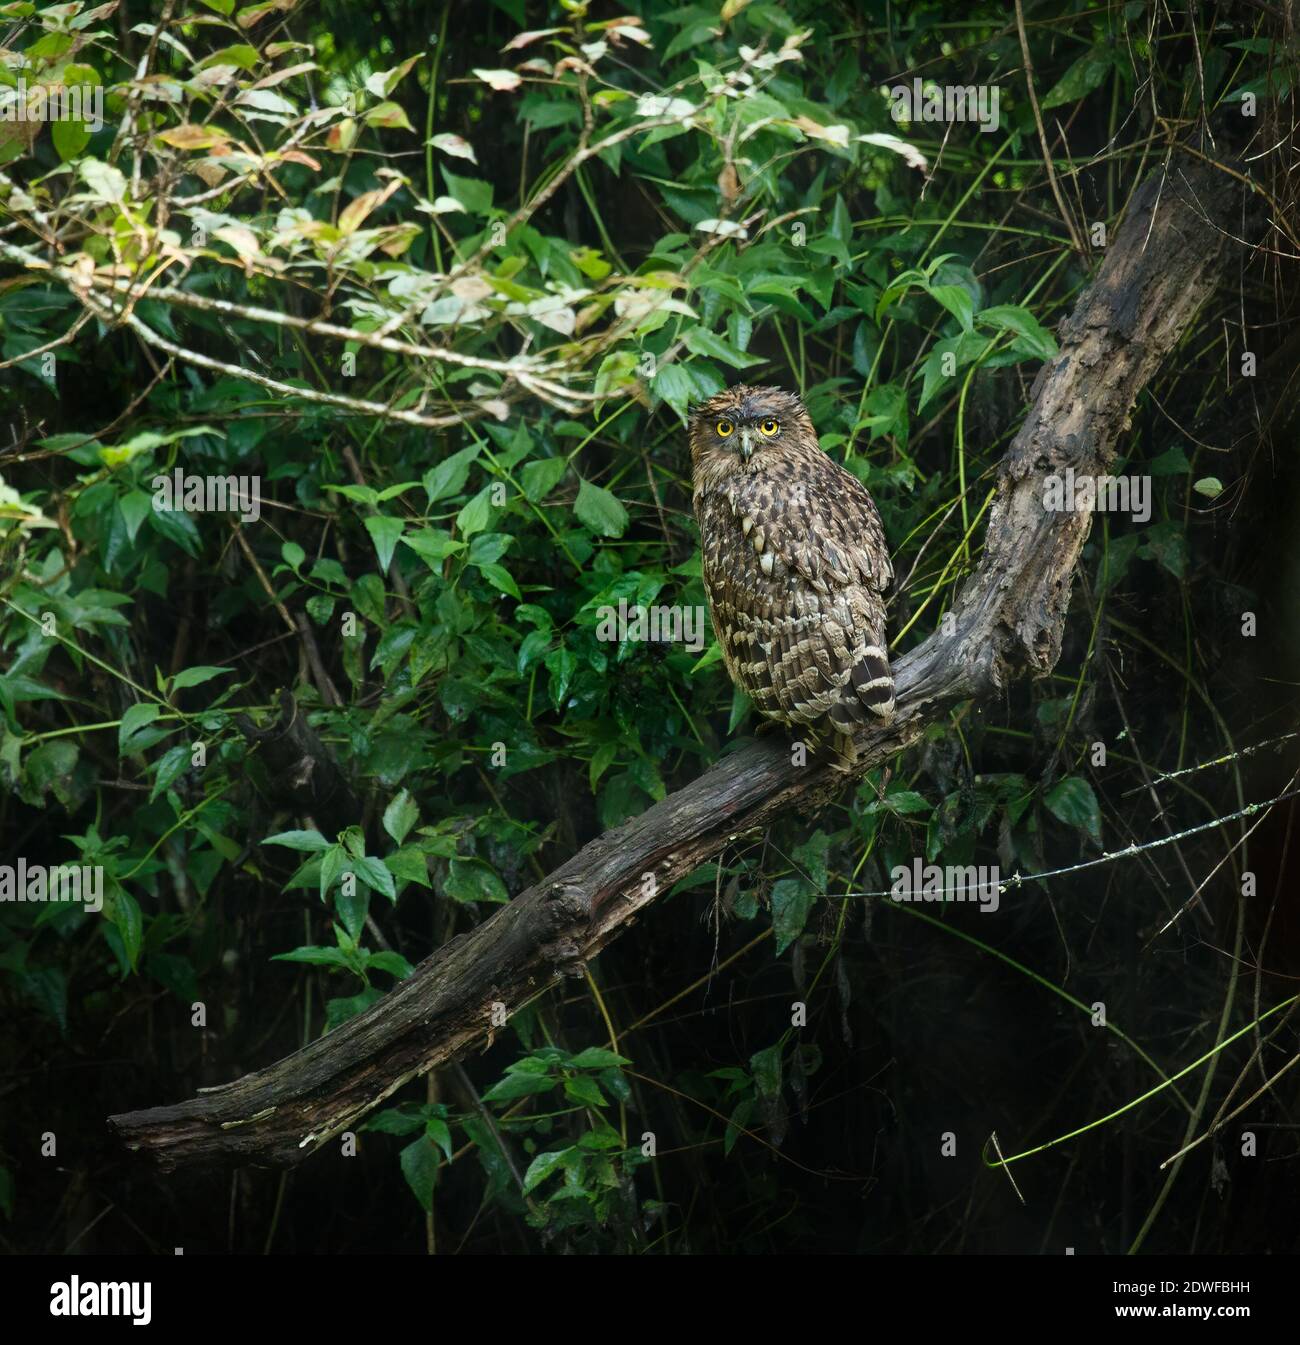 Owl...a carnivorous nocturnal bird.. harmless... but...to strengthen spiritually towards faith and holiness ..linked with mother nature... Stock Photo